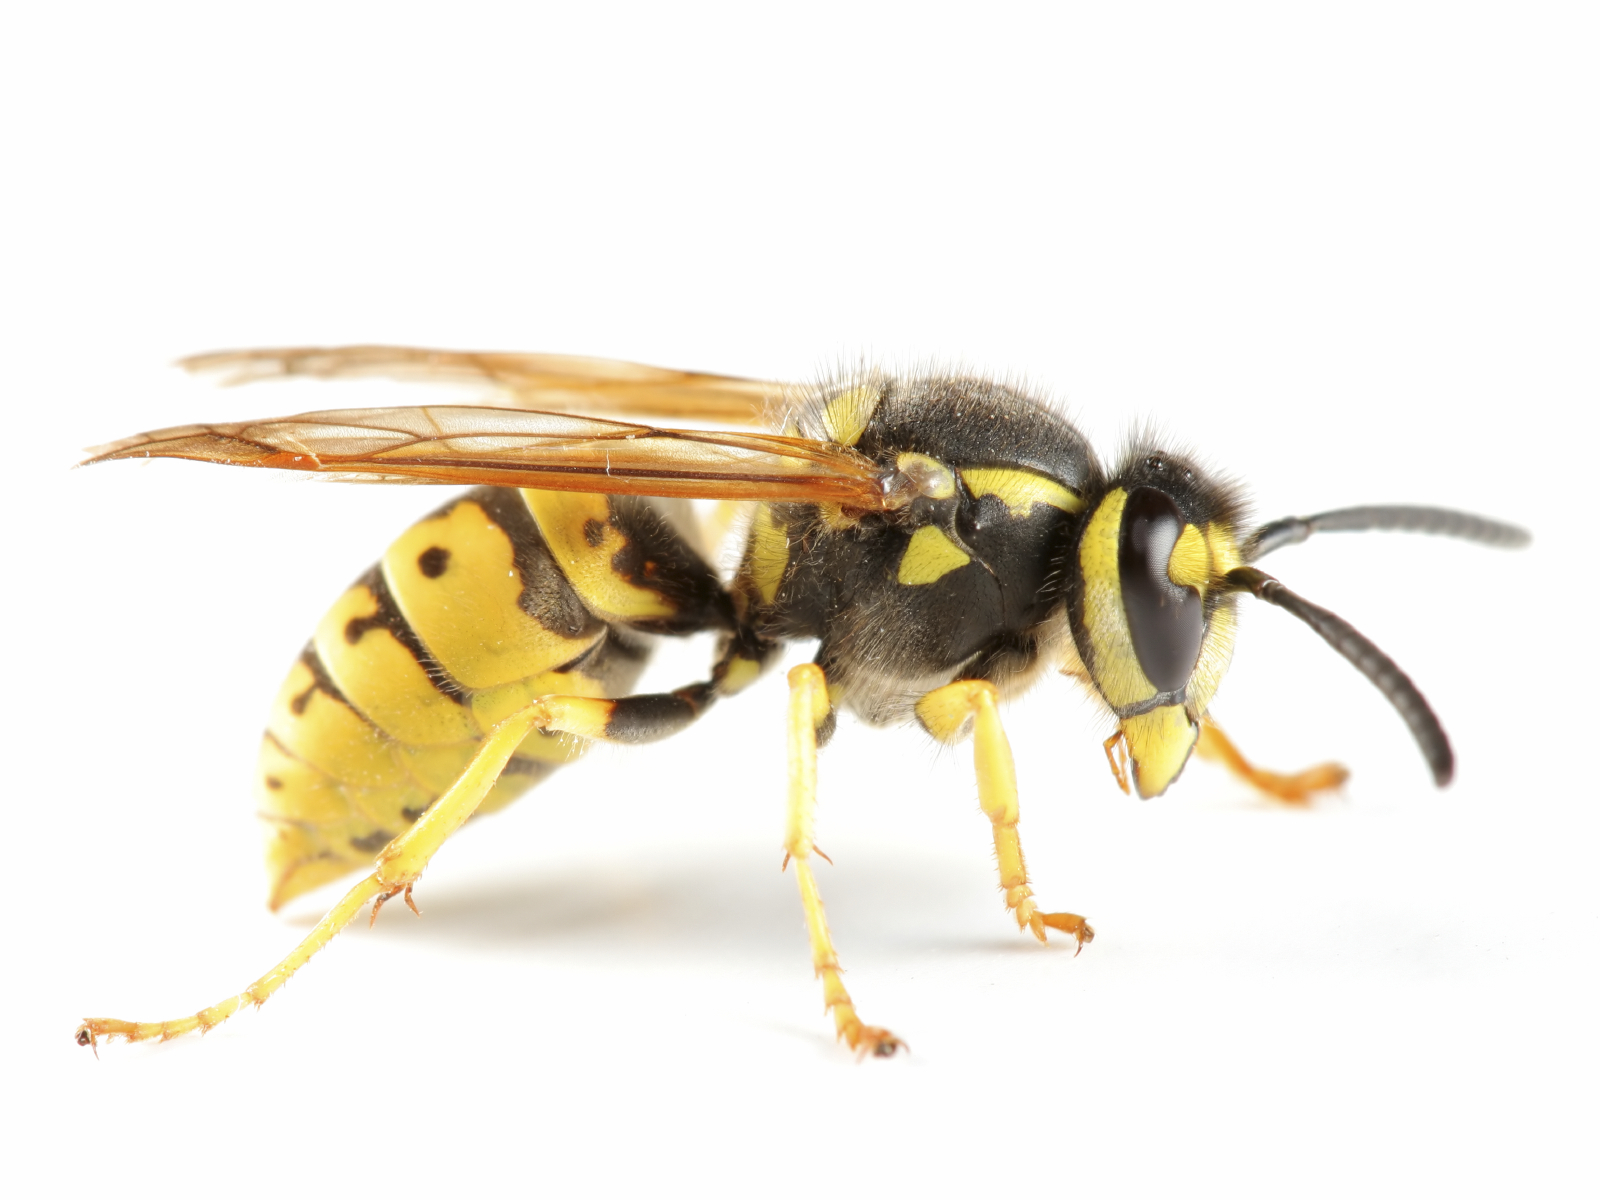 Wasp control - a little information about wasps | EnviroGuard